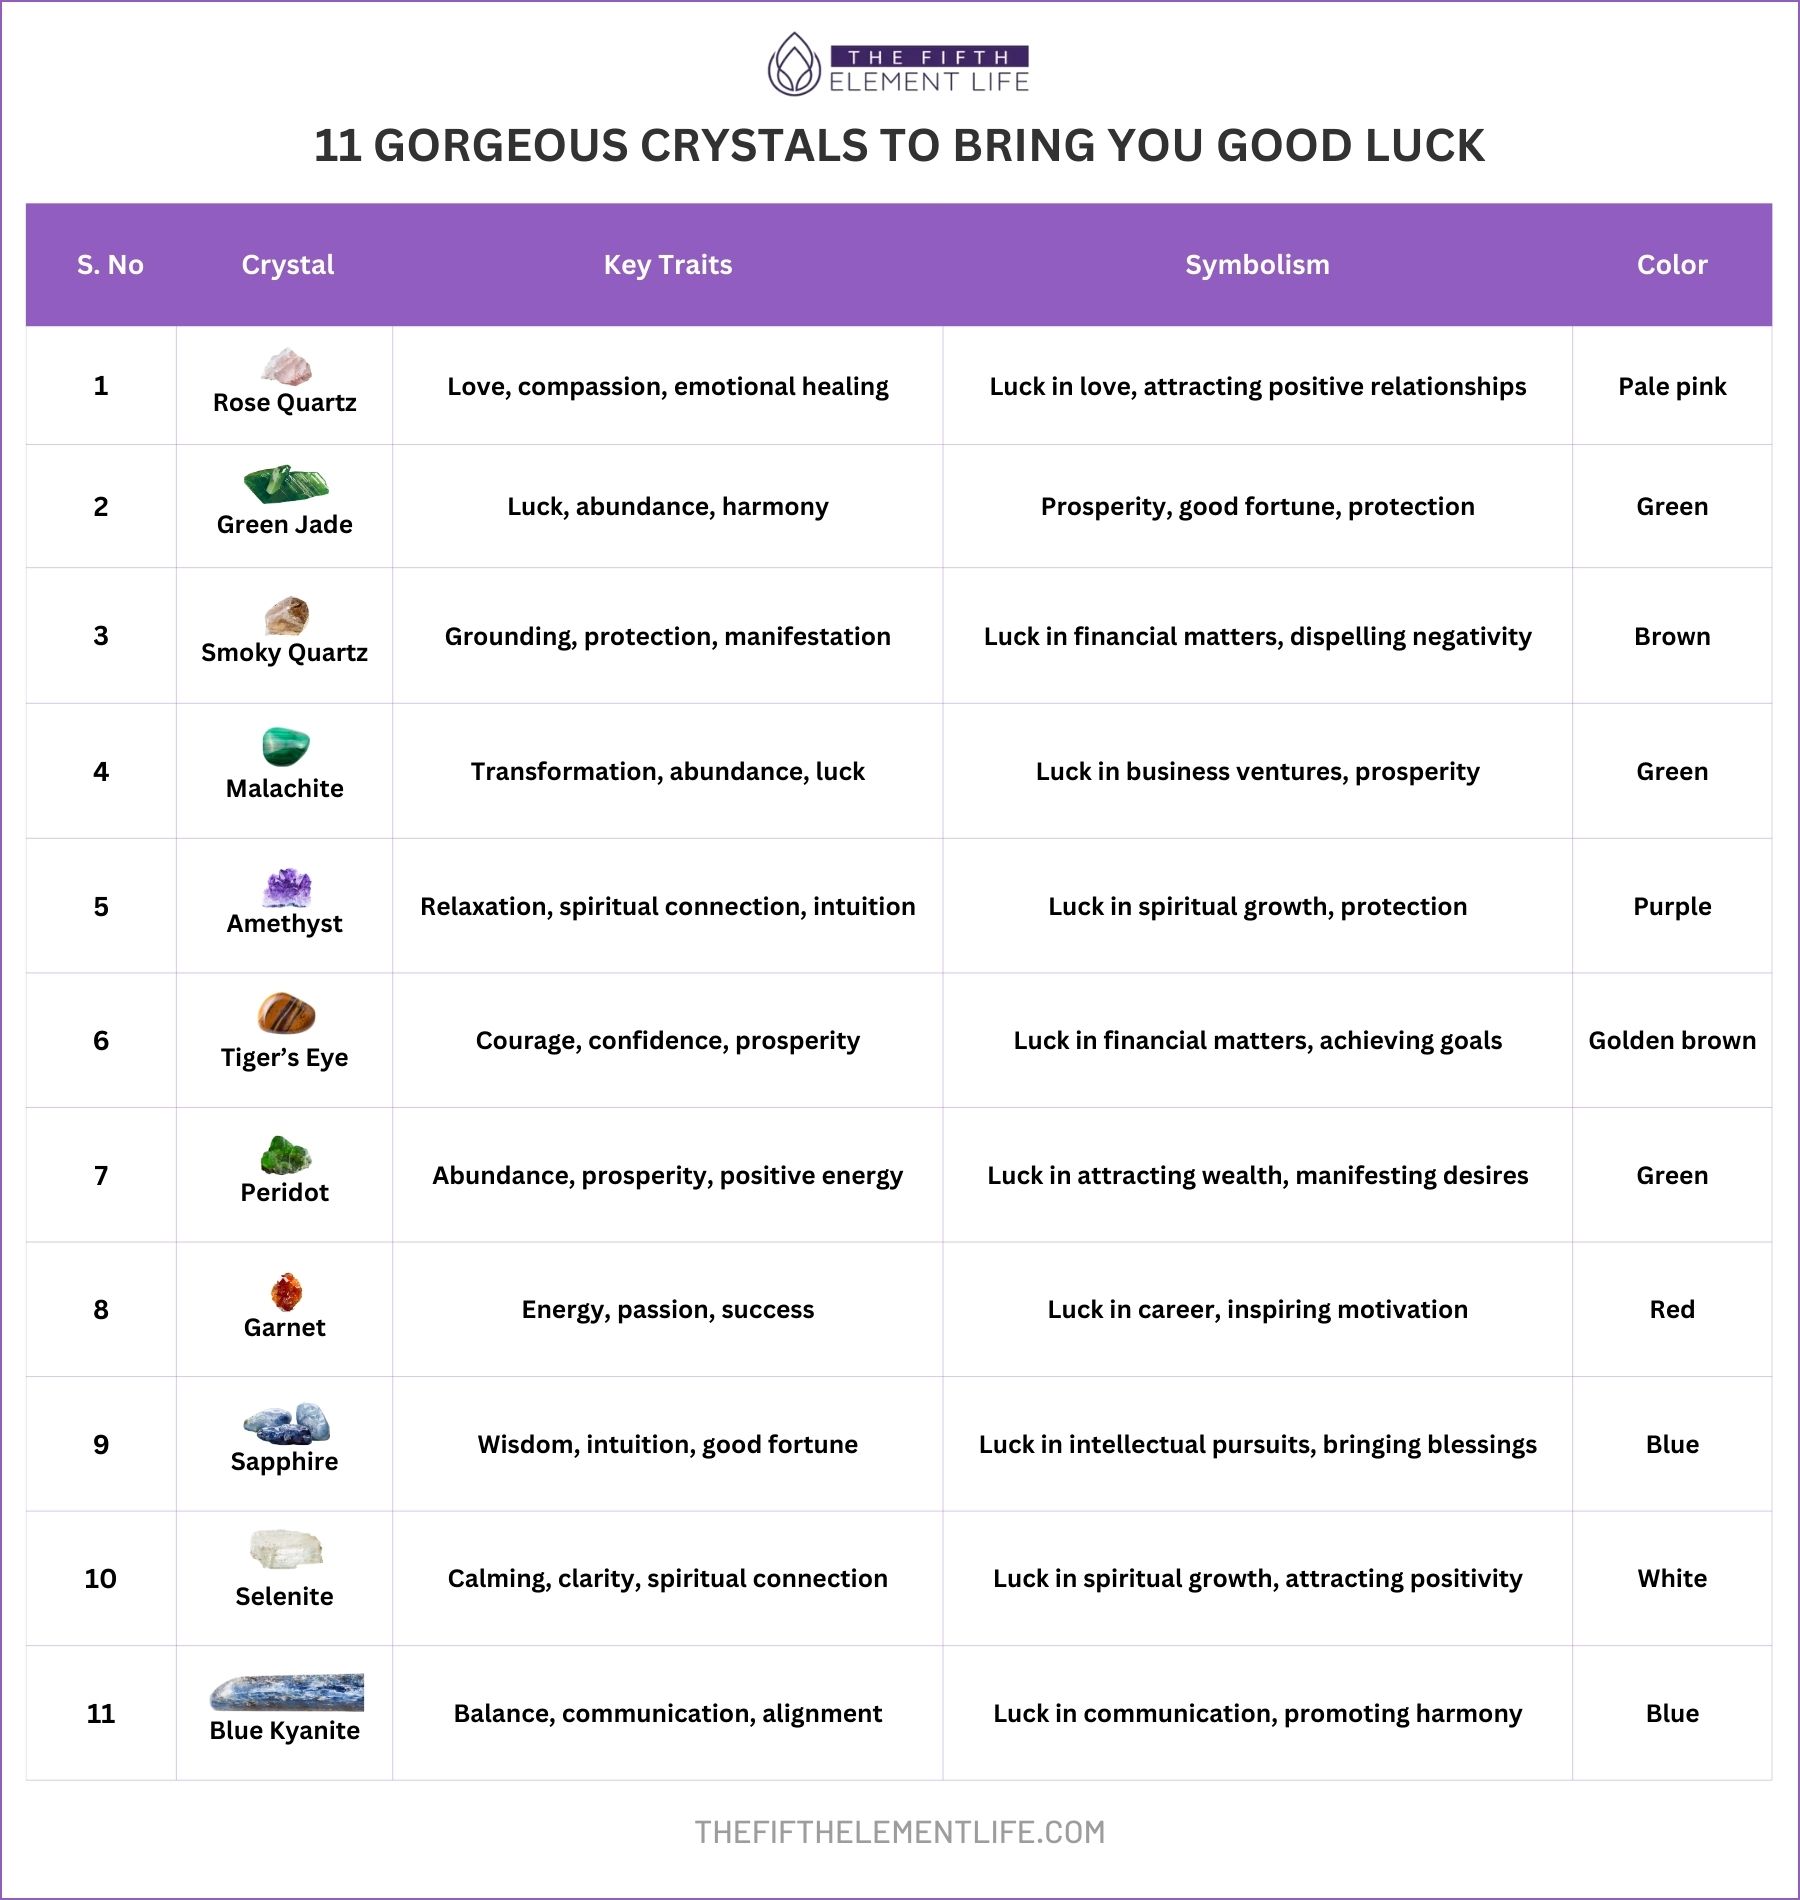 11 Gorgeous Crystals To Bring You Good Luck